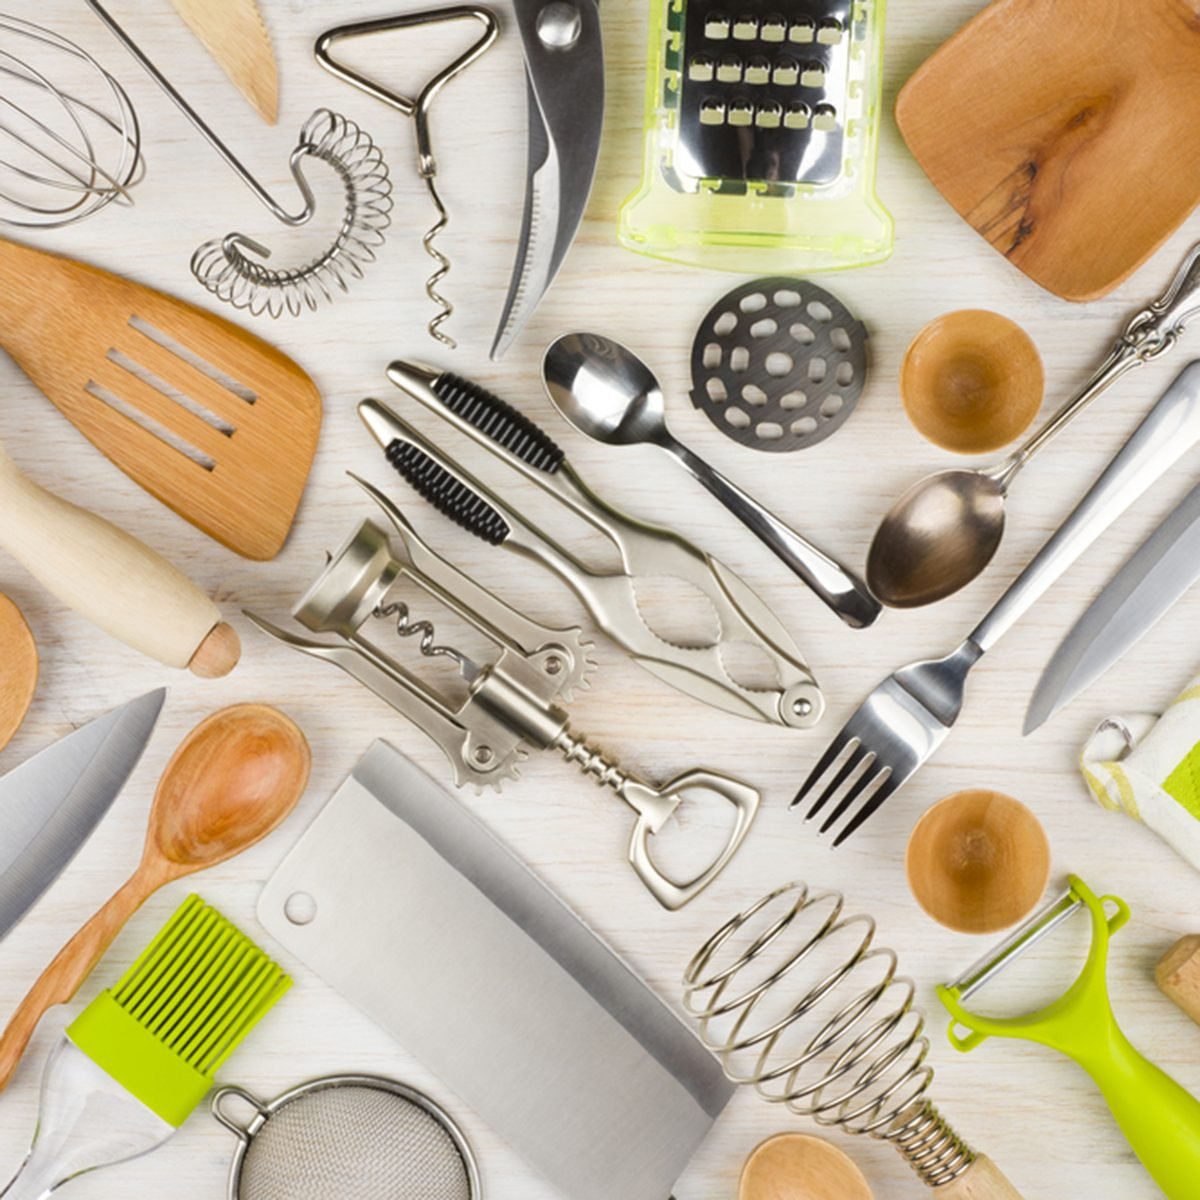 The Top 10 Kitchen Tools Every Home Cook Needs – SheKnows